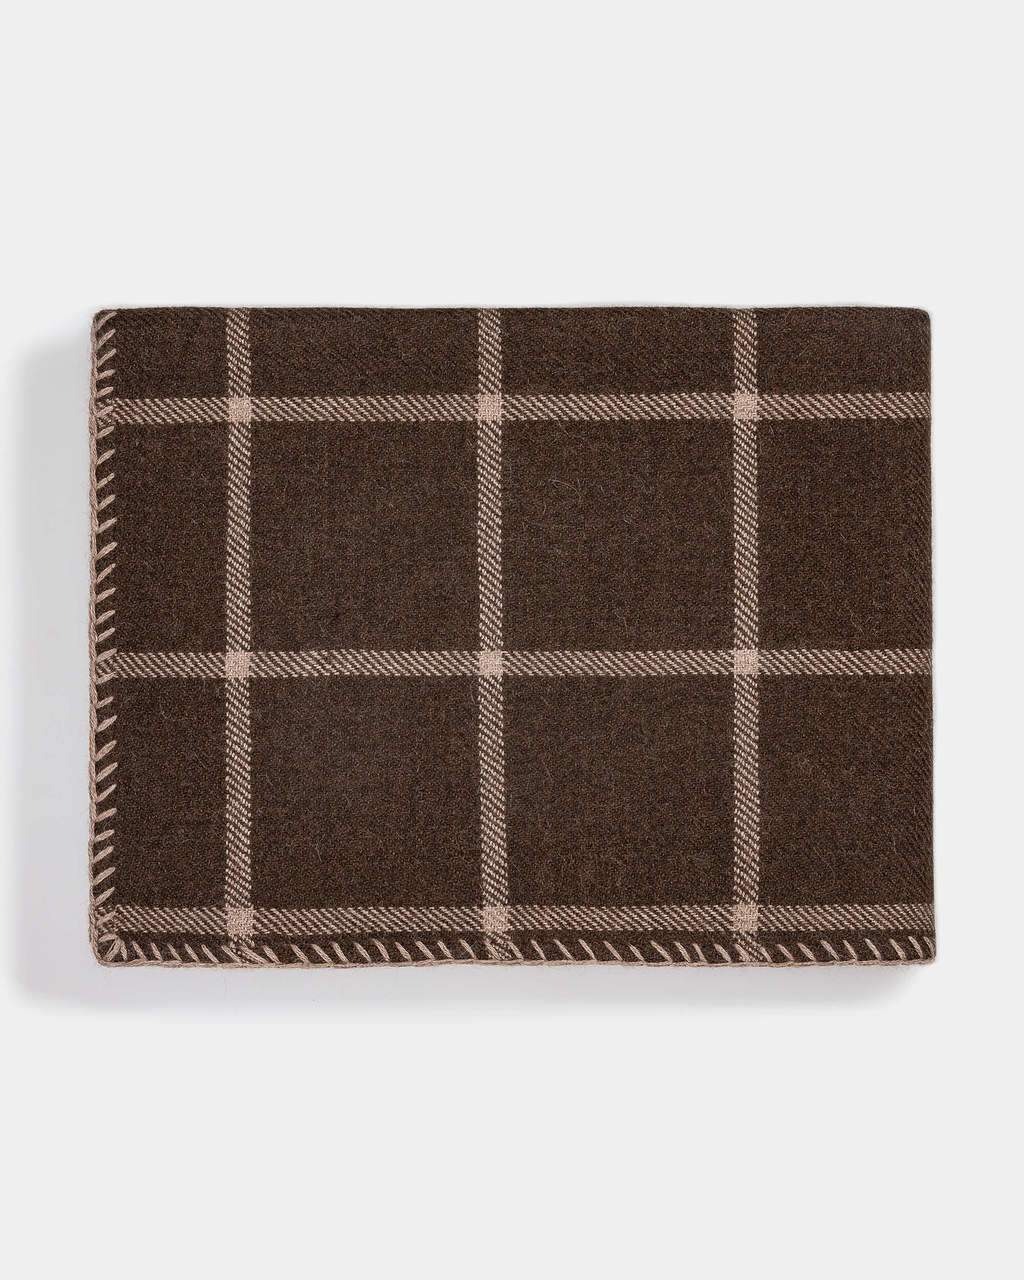 Graydon Alpaca Throw in Chocolate and Taupe by Alicia Adams